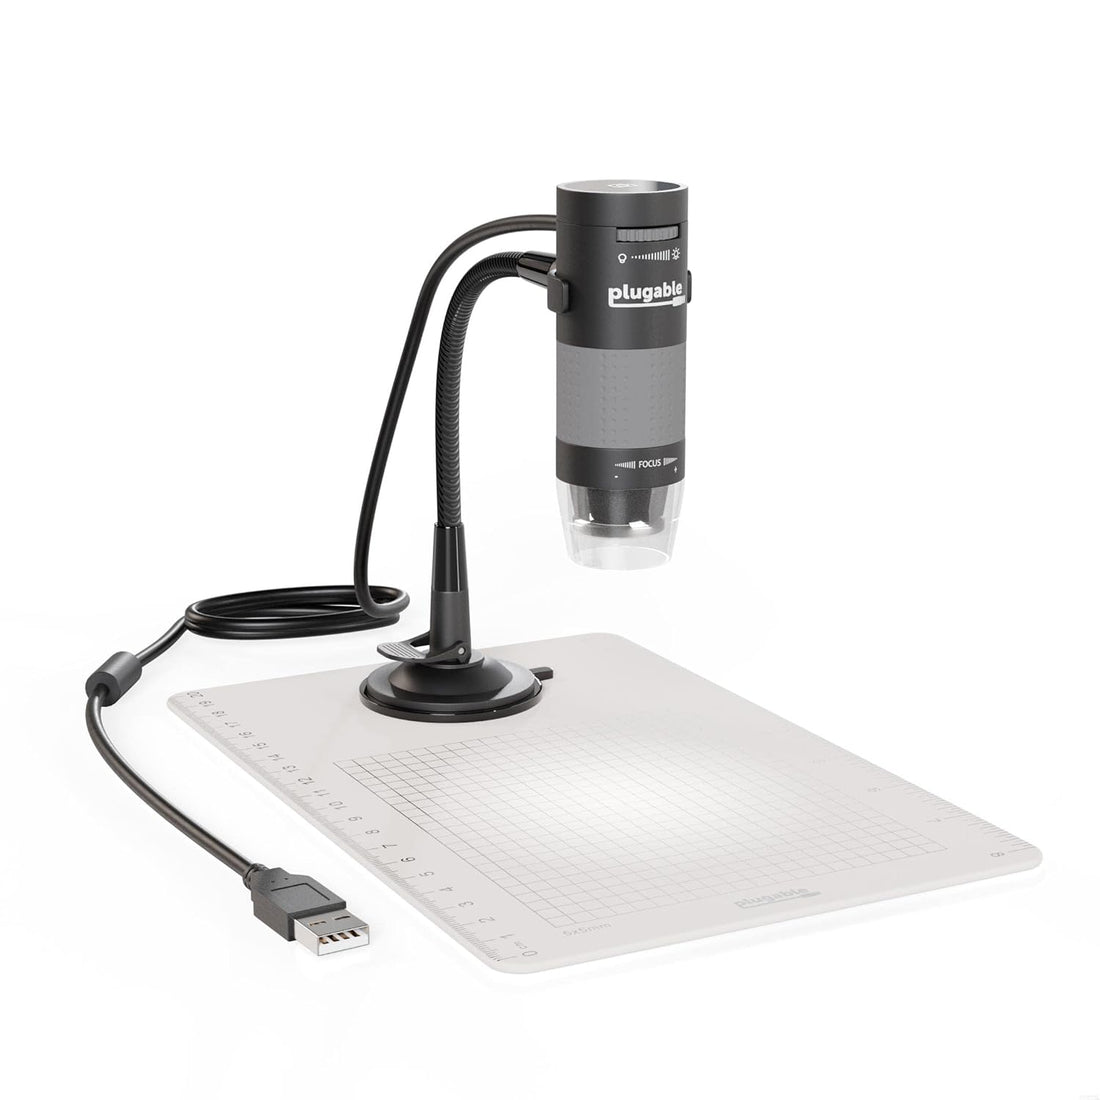 Plugable USB 2.0 Digital Microscope with Flexible Arm Observation Stand for Windows, Mac, Linux (2MP, 10x-250x Magnification)